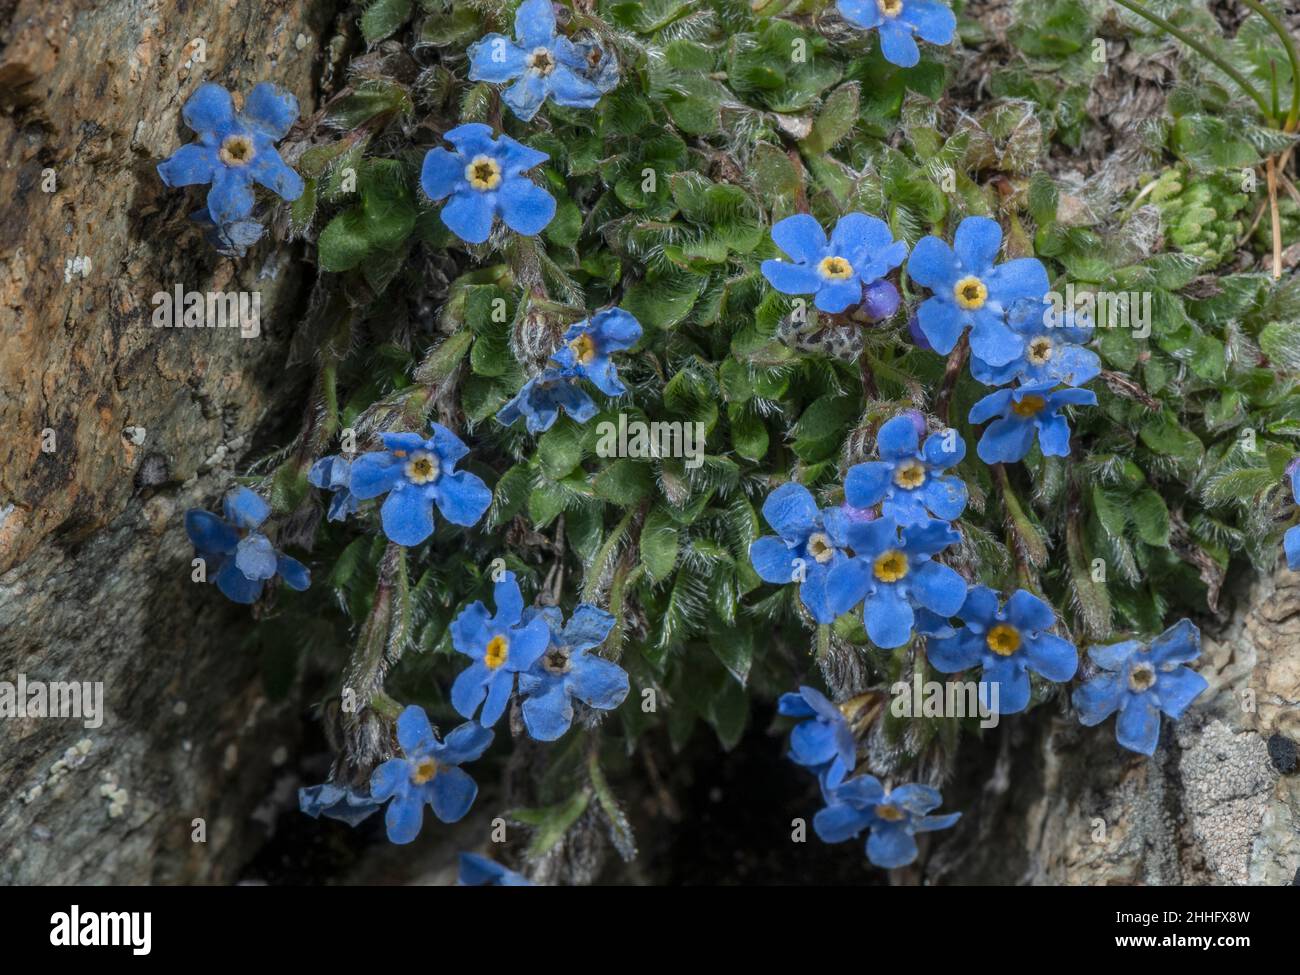 King of the Alps, Eritrichium nanum, in flower at 3000m in the Swiss Alps. Stock Photo